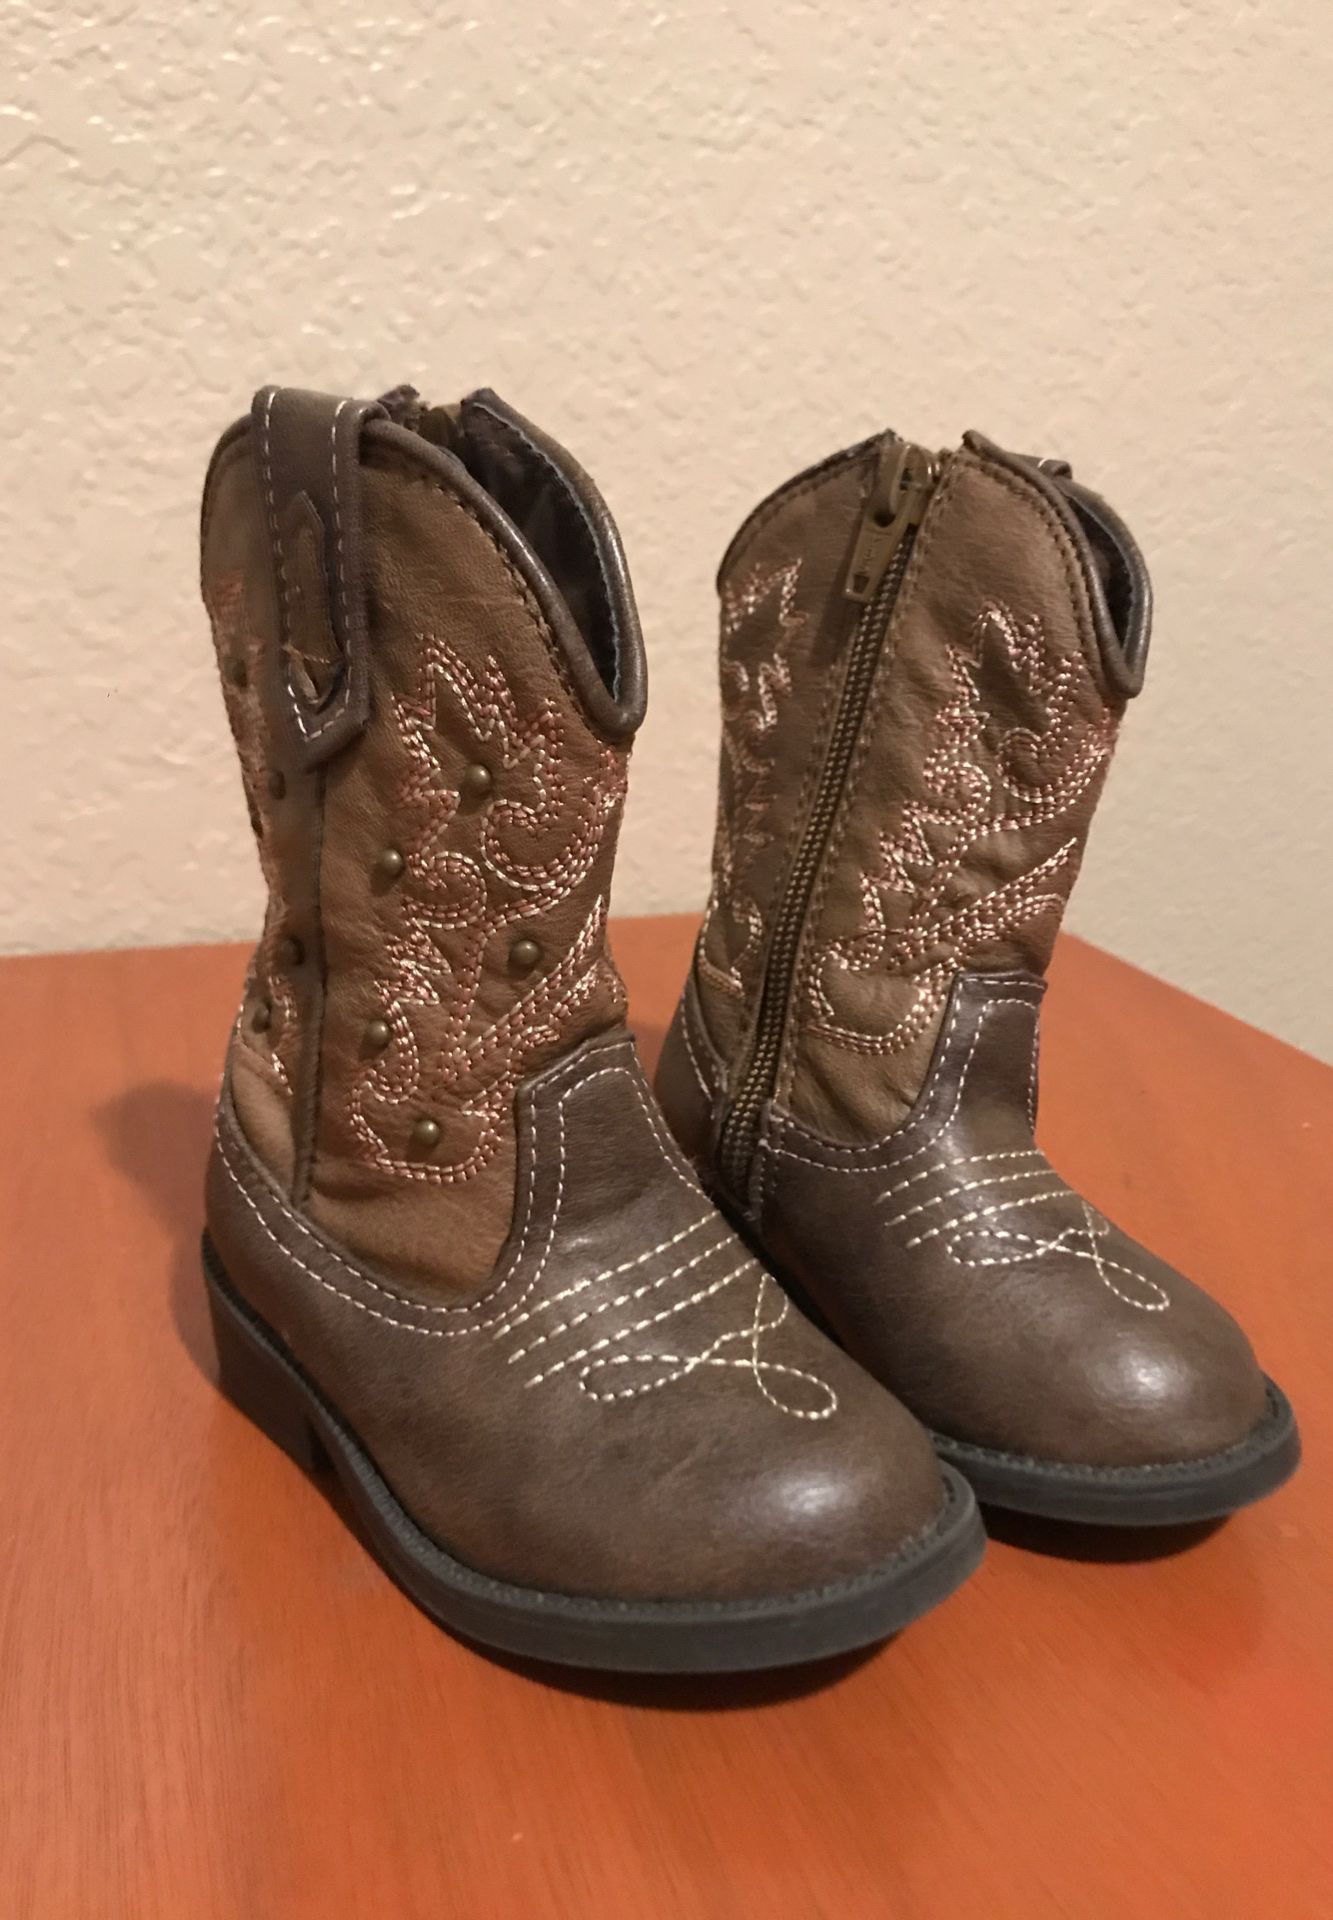 Toddler girl boots size 5